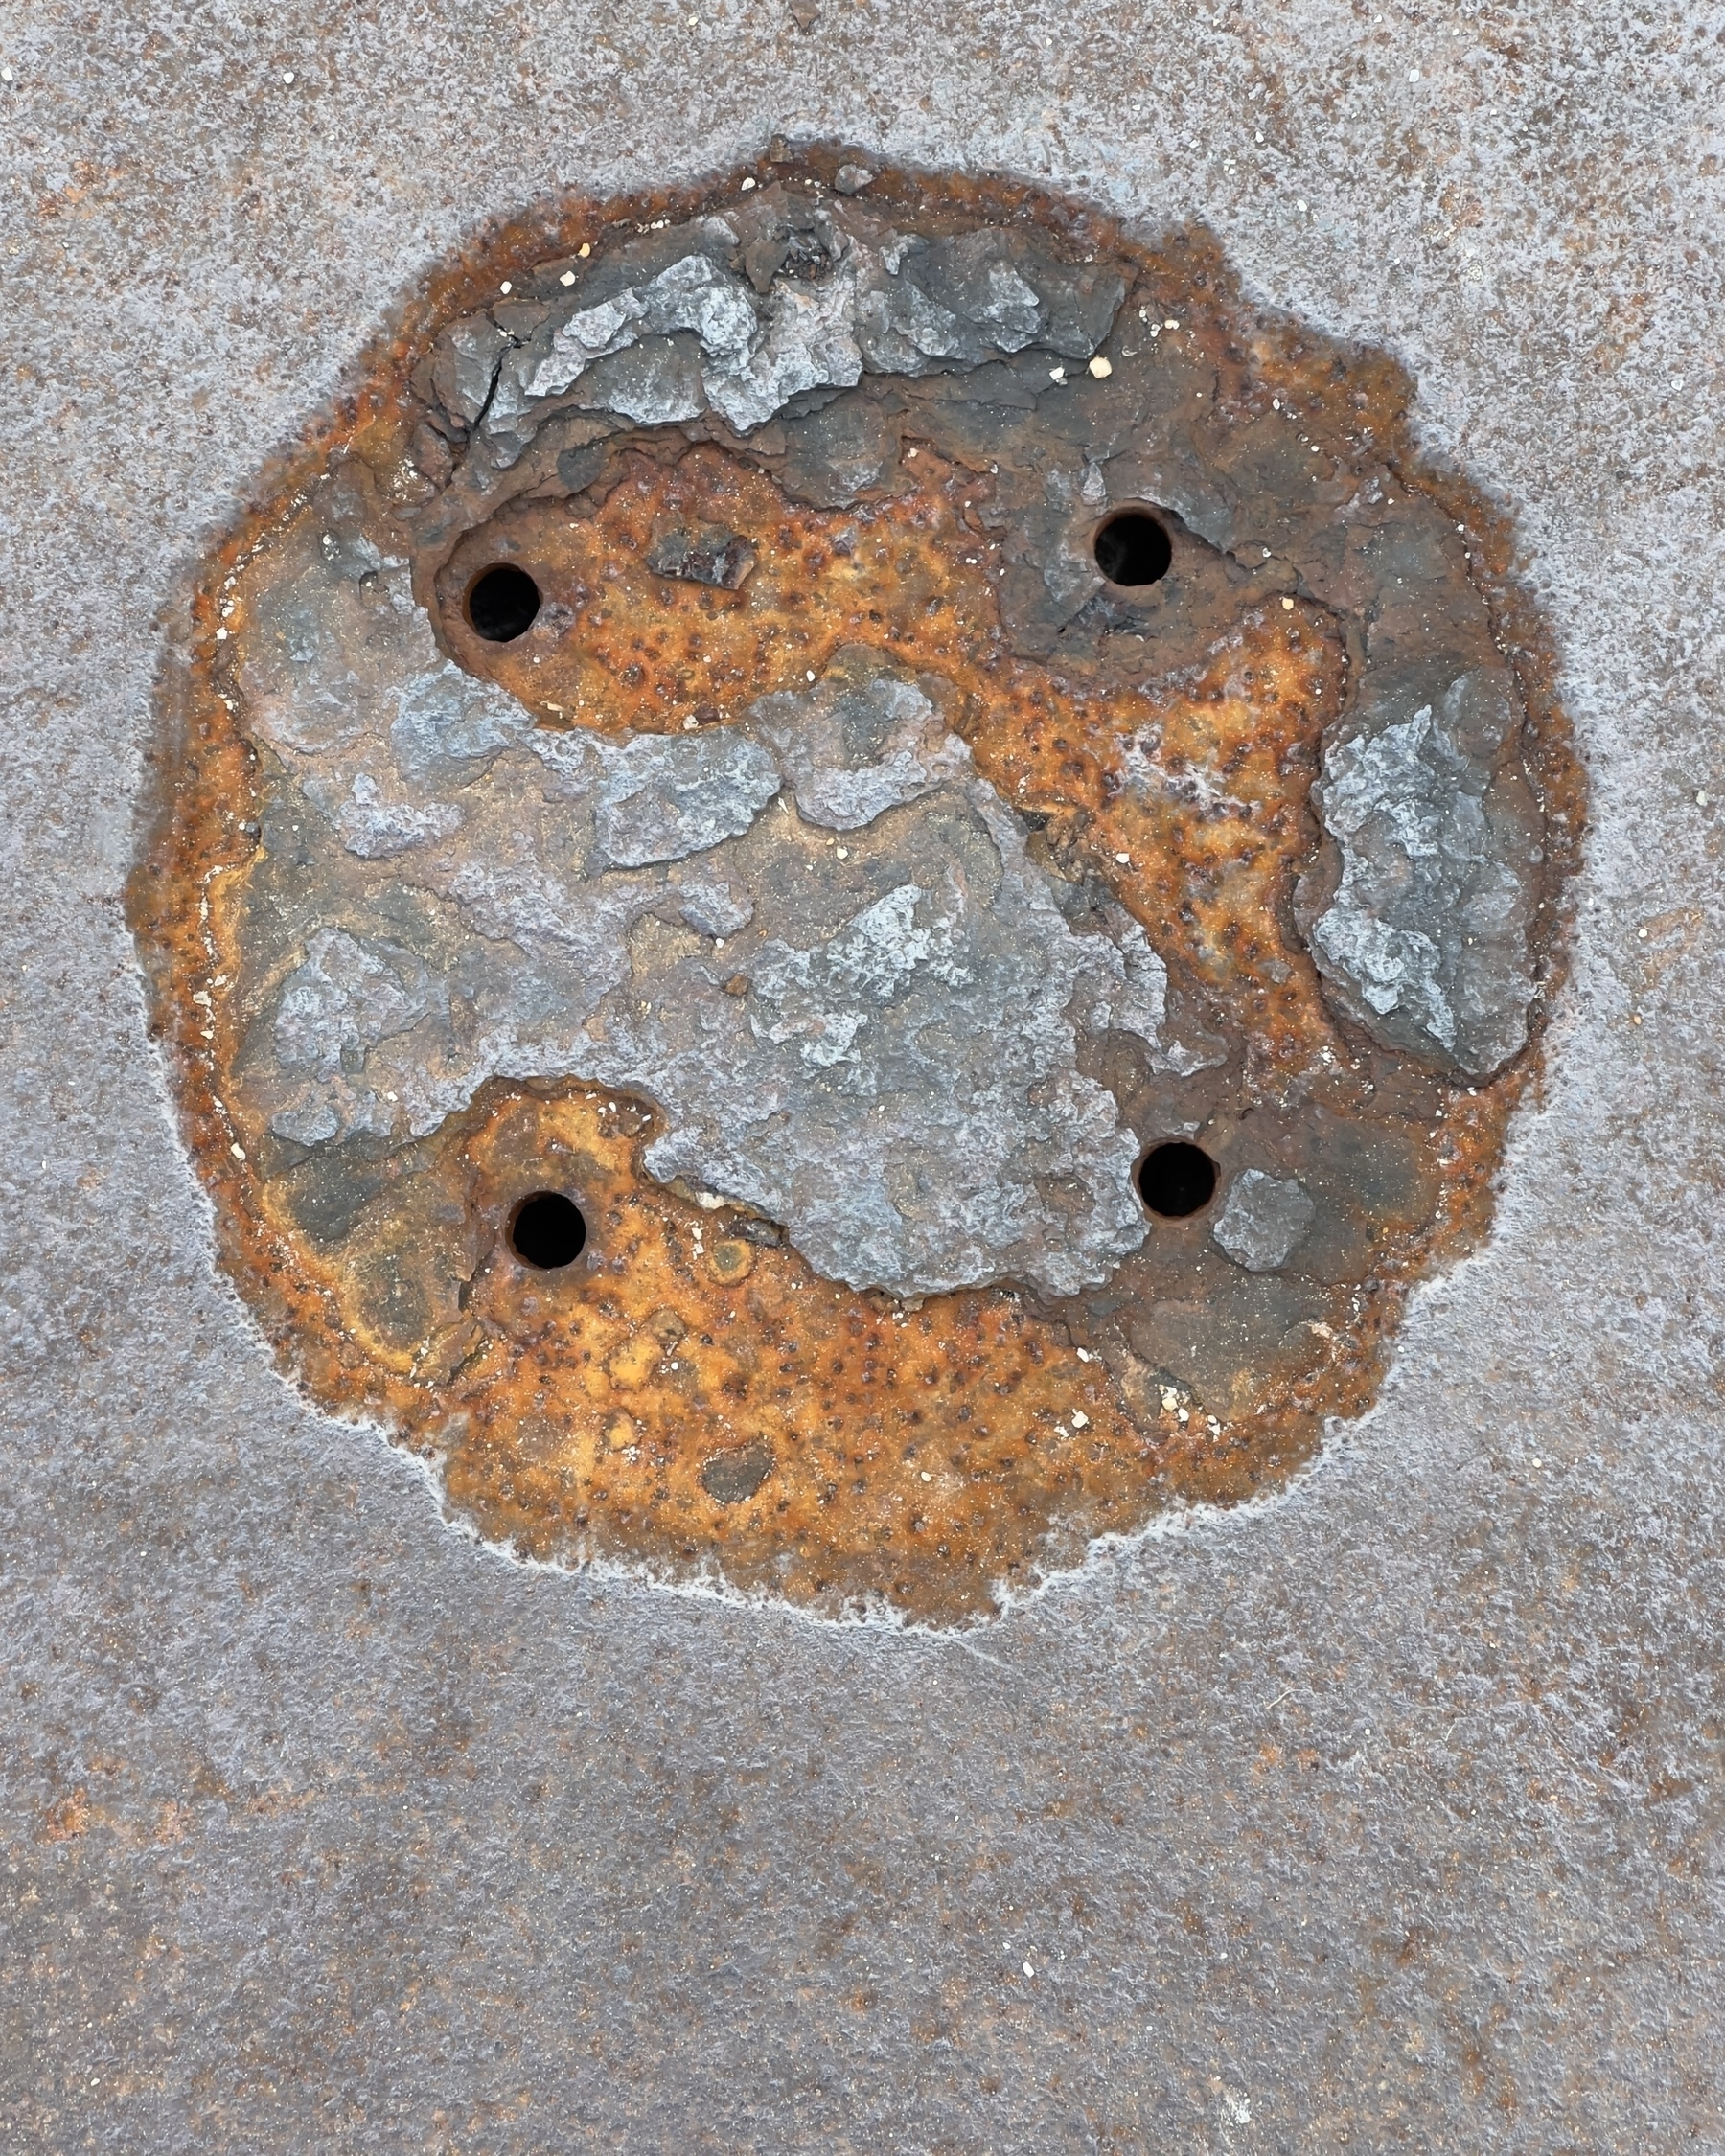 4 small holes in a square pattern in a circular patch of rust in a manhole cover.